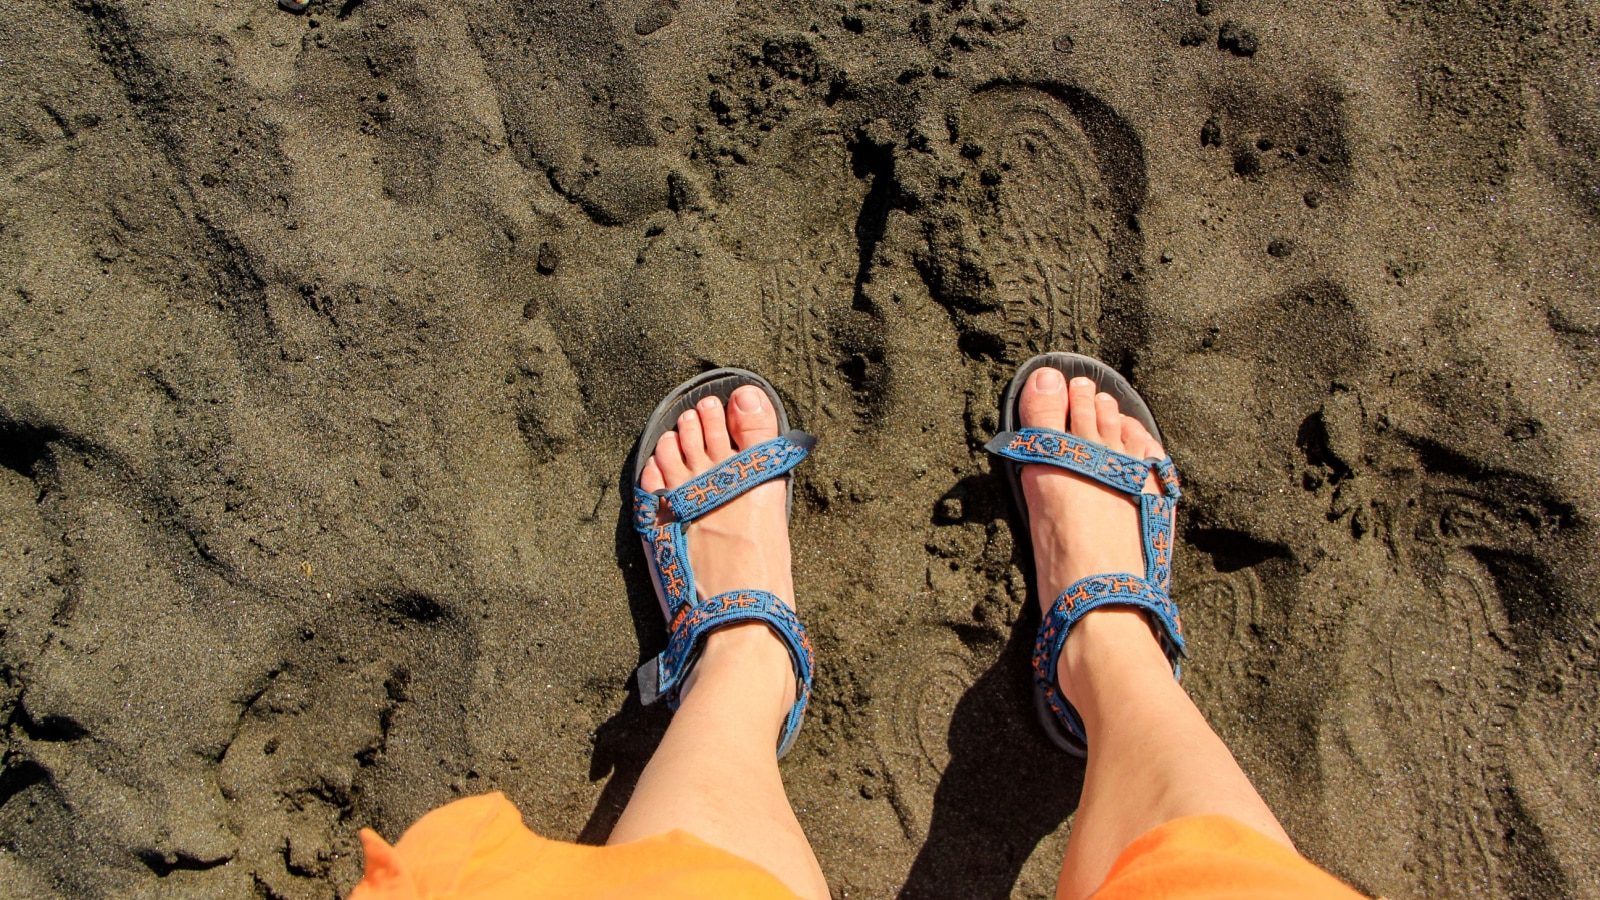 Legs in blue Teva sandals and orange breeches against the backdrop of black sand on the seashore in Naples